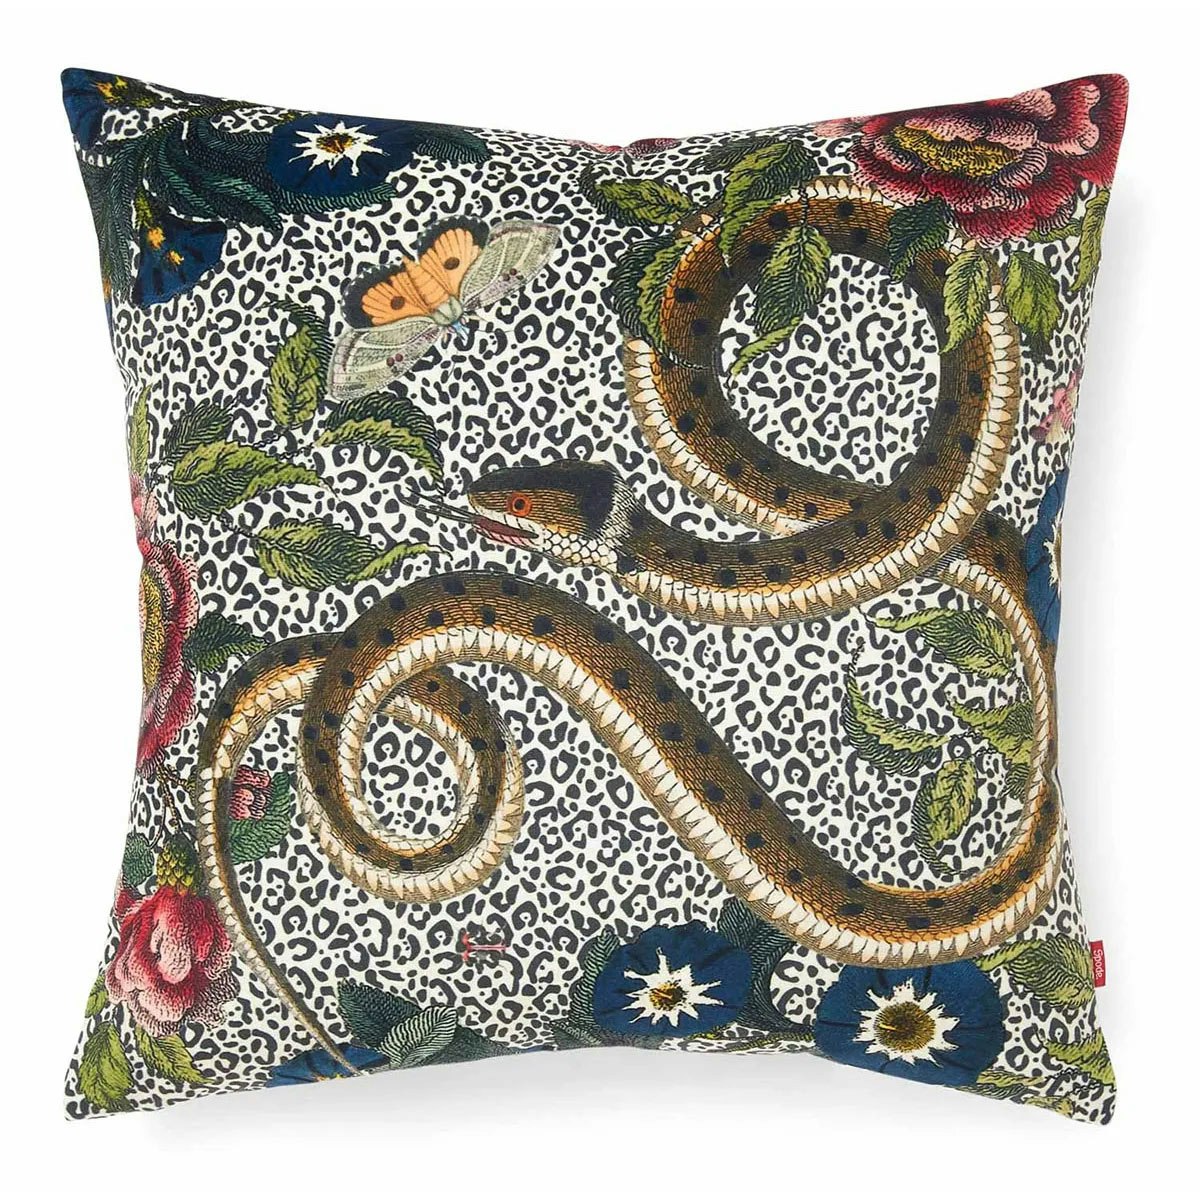 Creatures Of Curiosity Scatter Cushion 45x45 cm, Snake